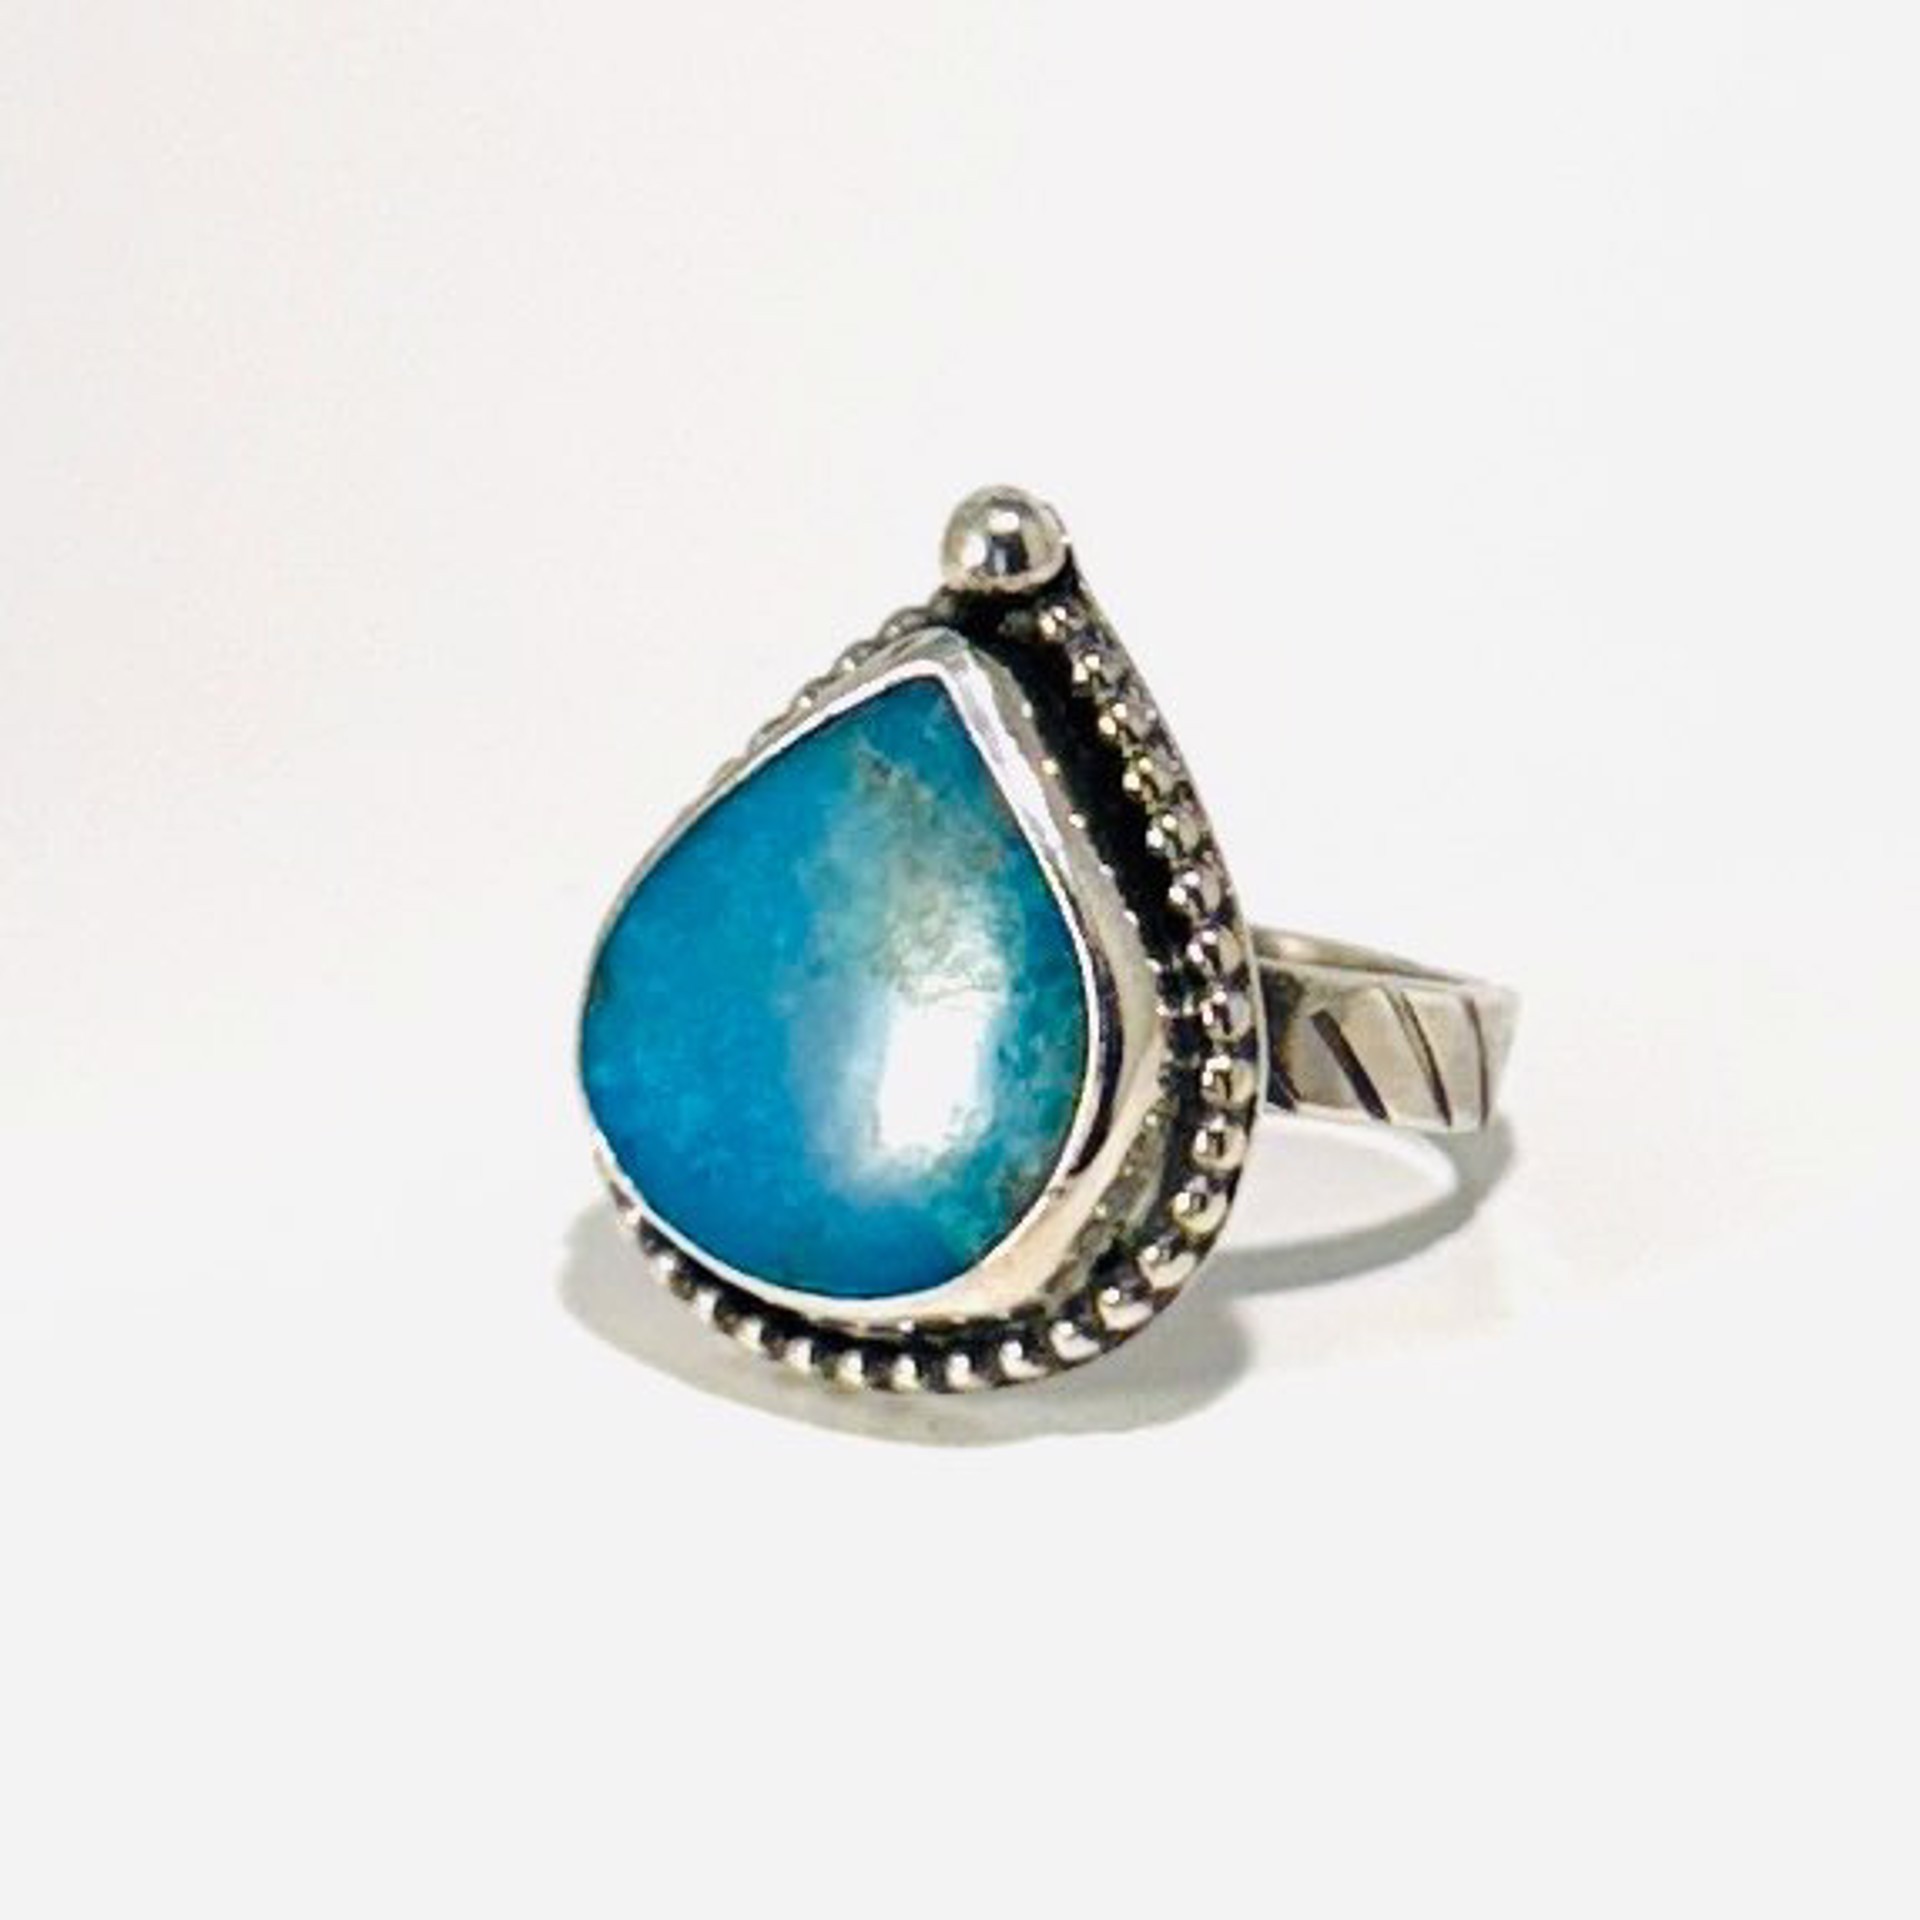 Morenci Turquoise with Pyrite Matrix Ring sz9.5 AB23-73 by Anne Bivens